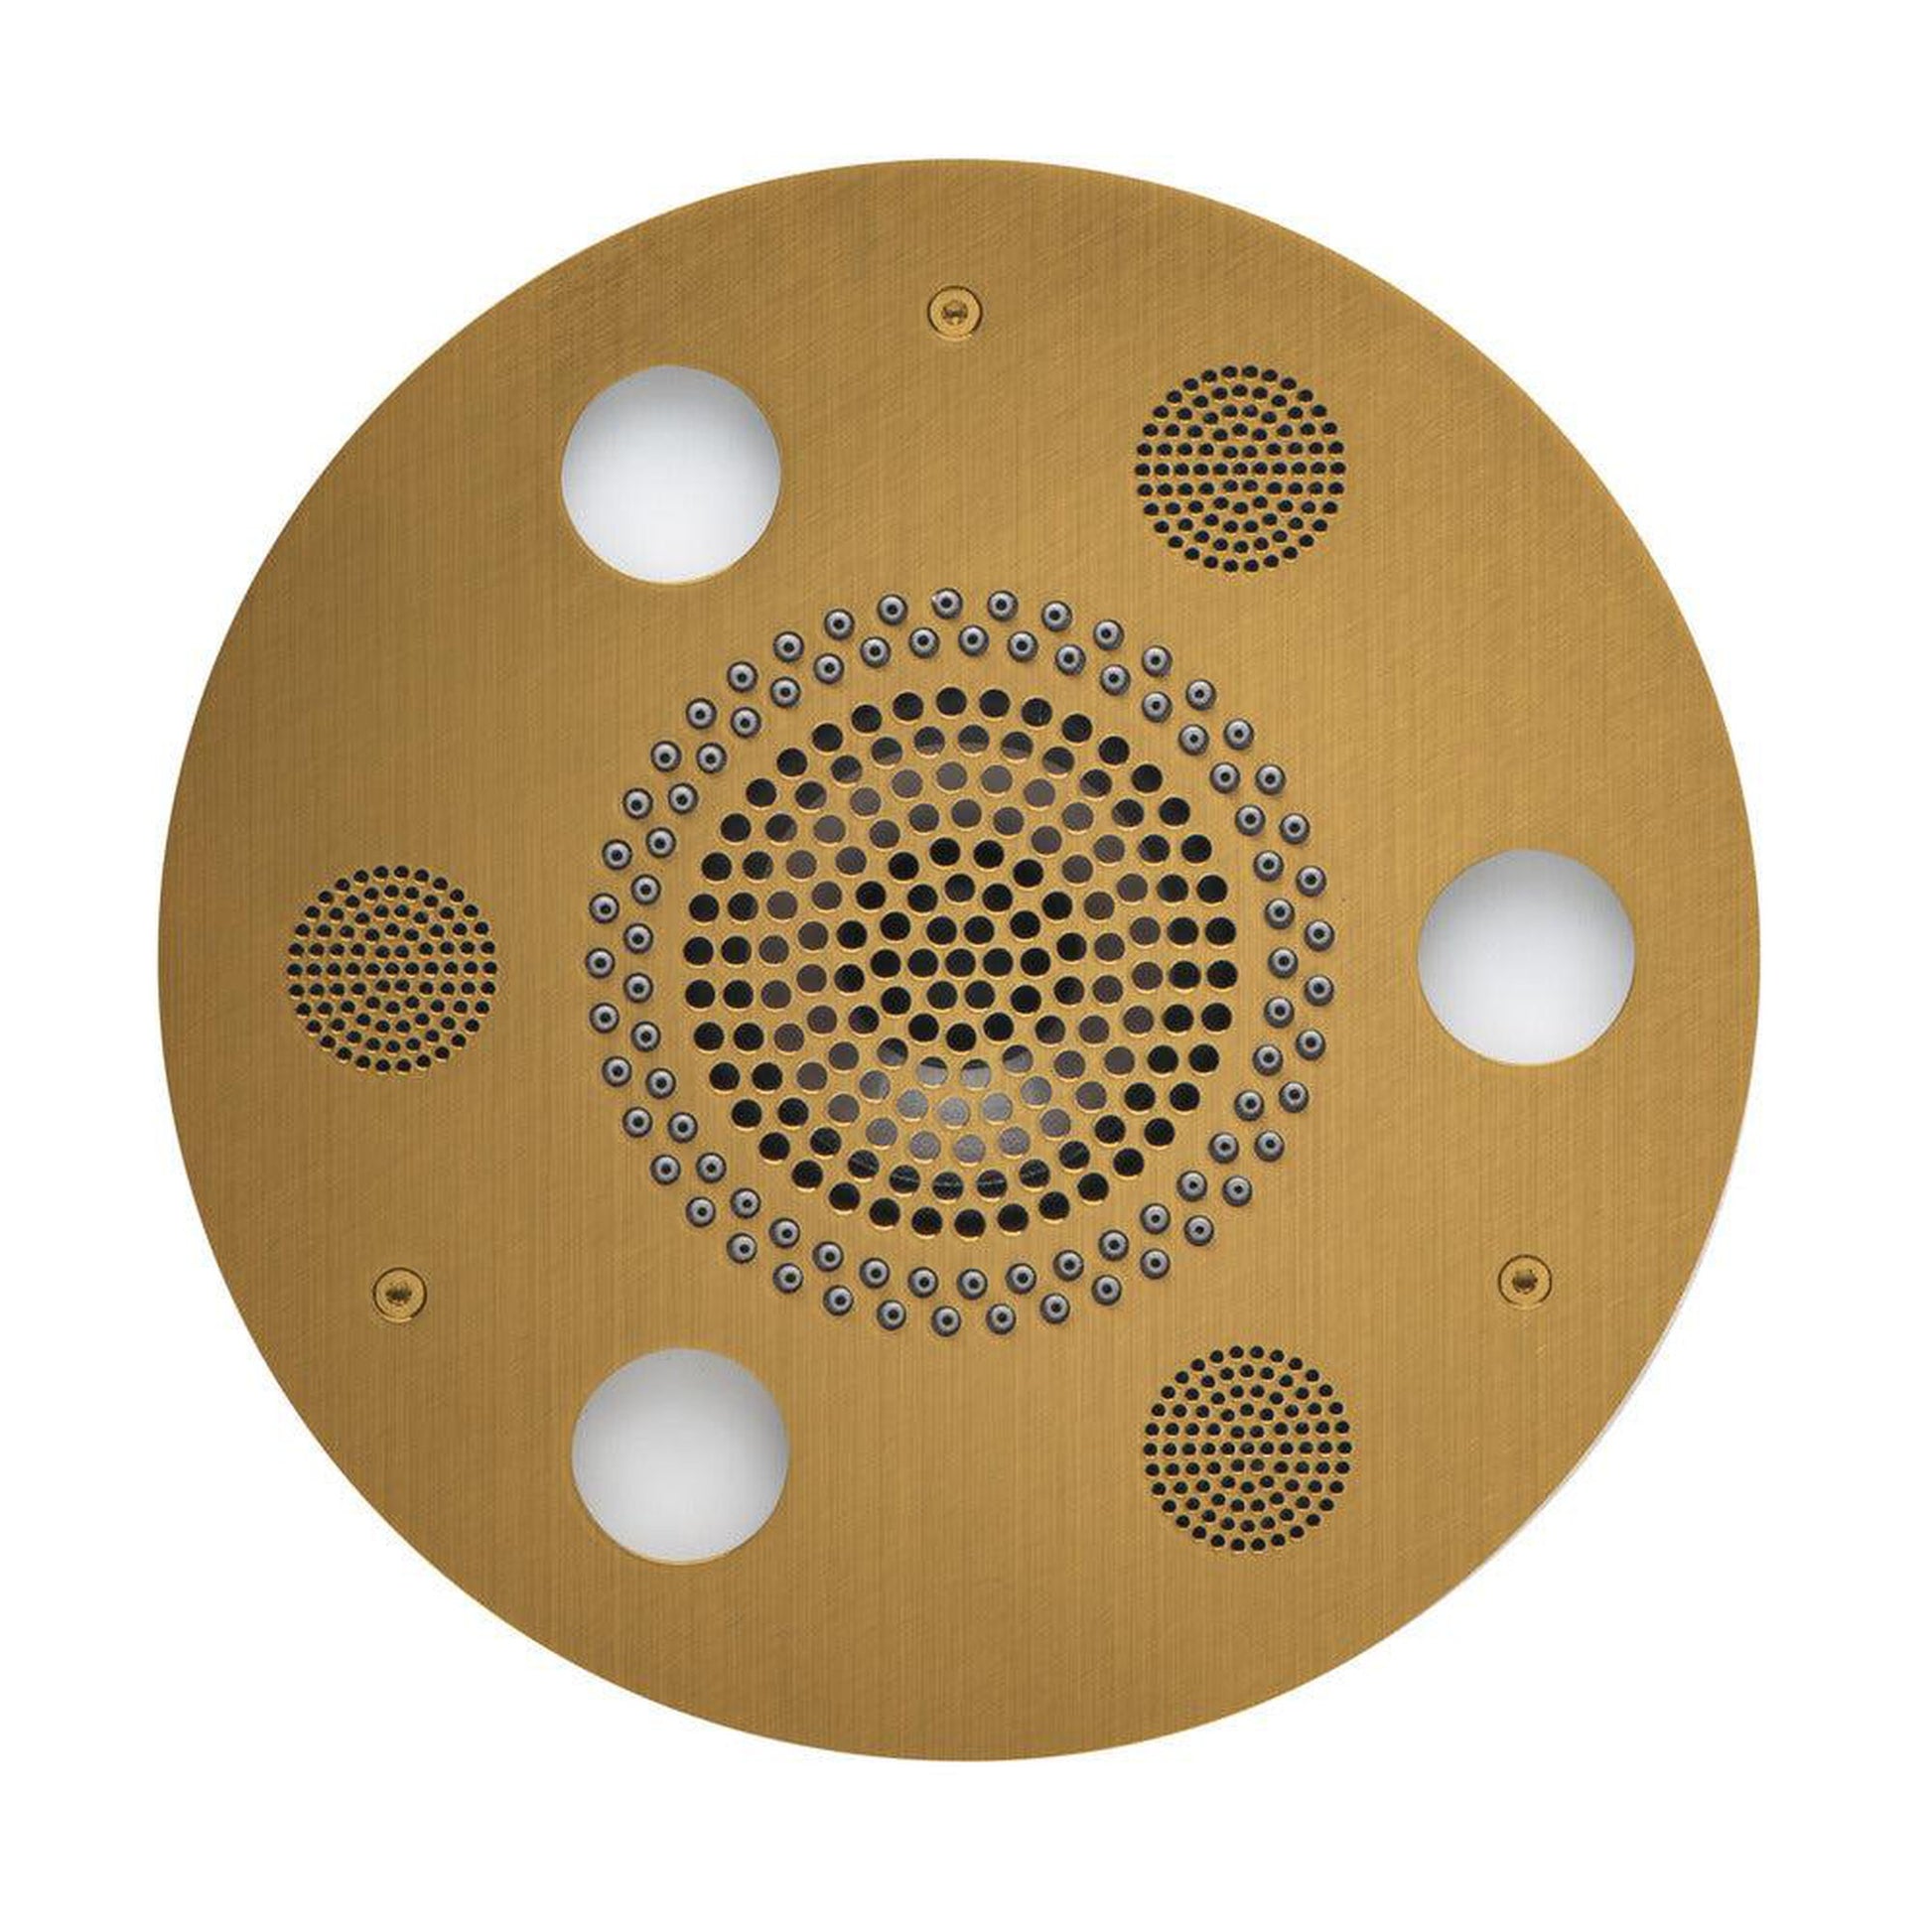 ThermaSol 10" Antique Brass Finish Round Serenity Advanced Light, Sound and Rain System